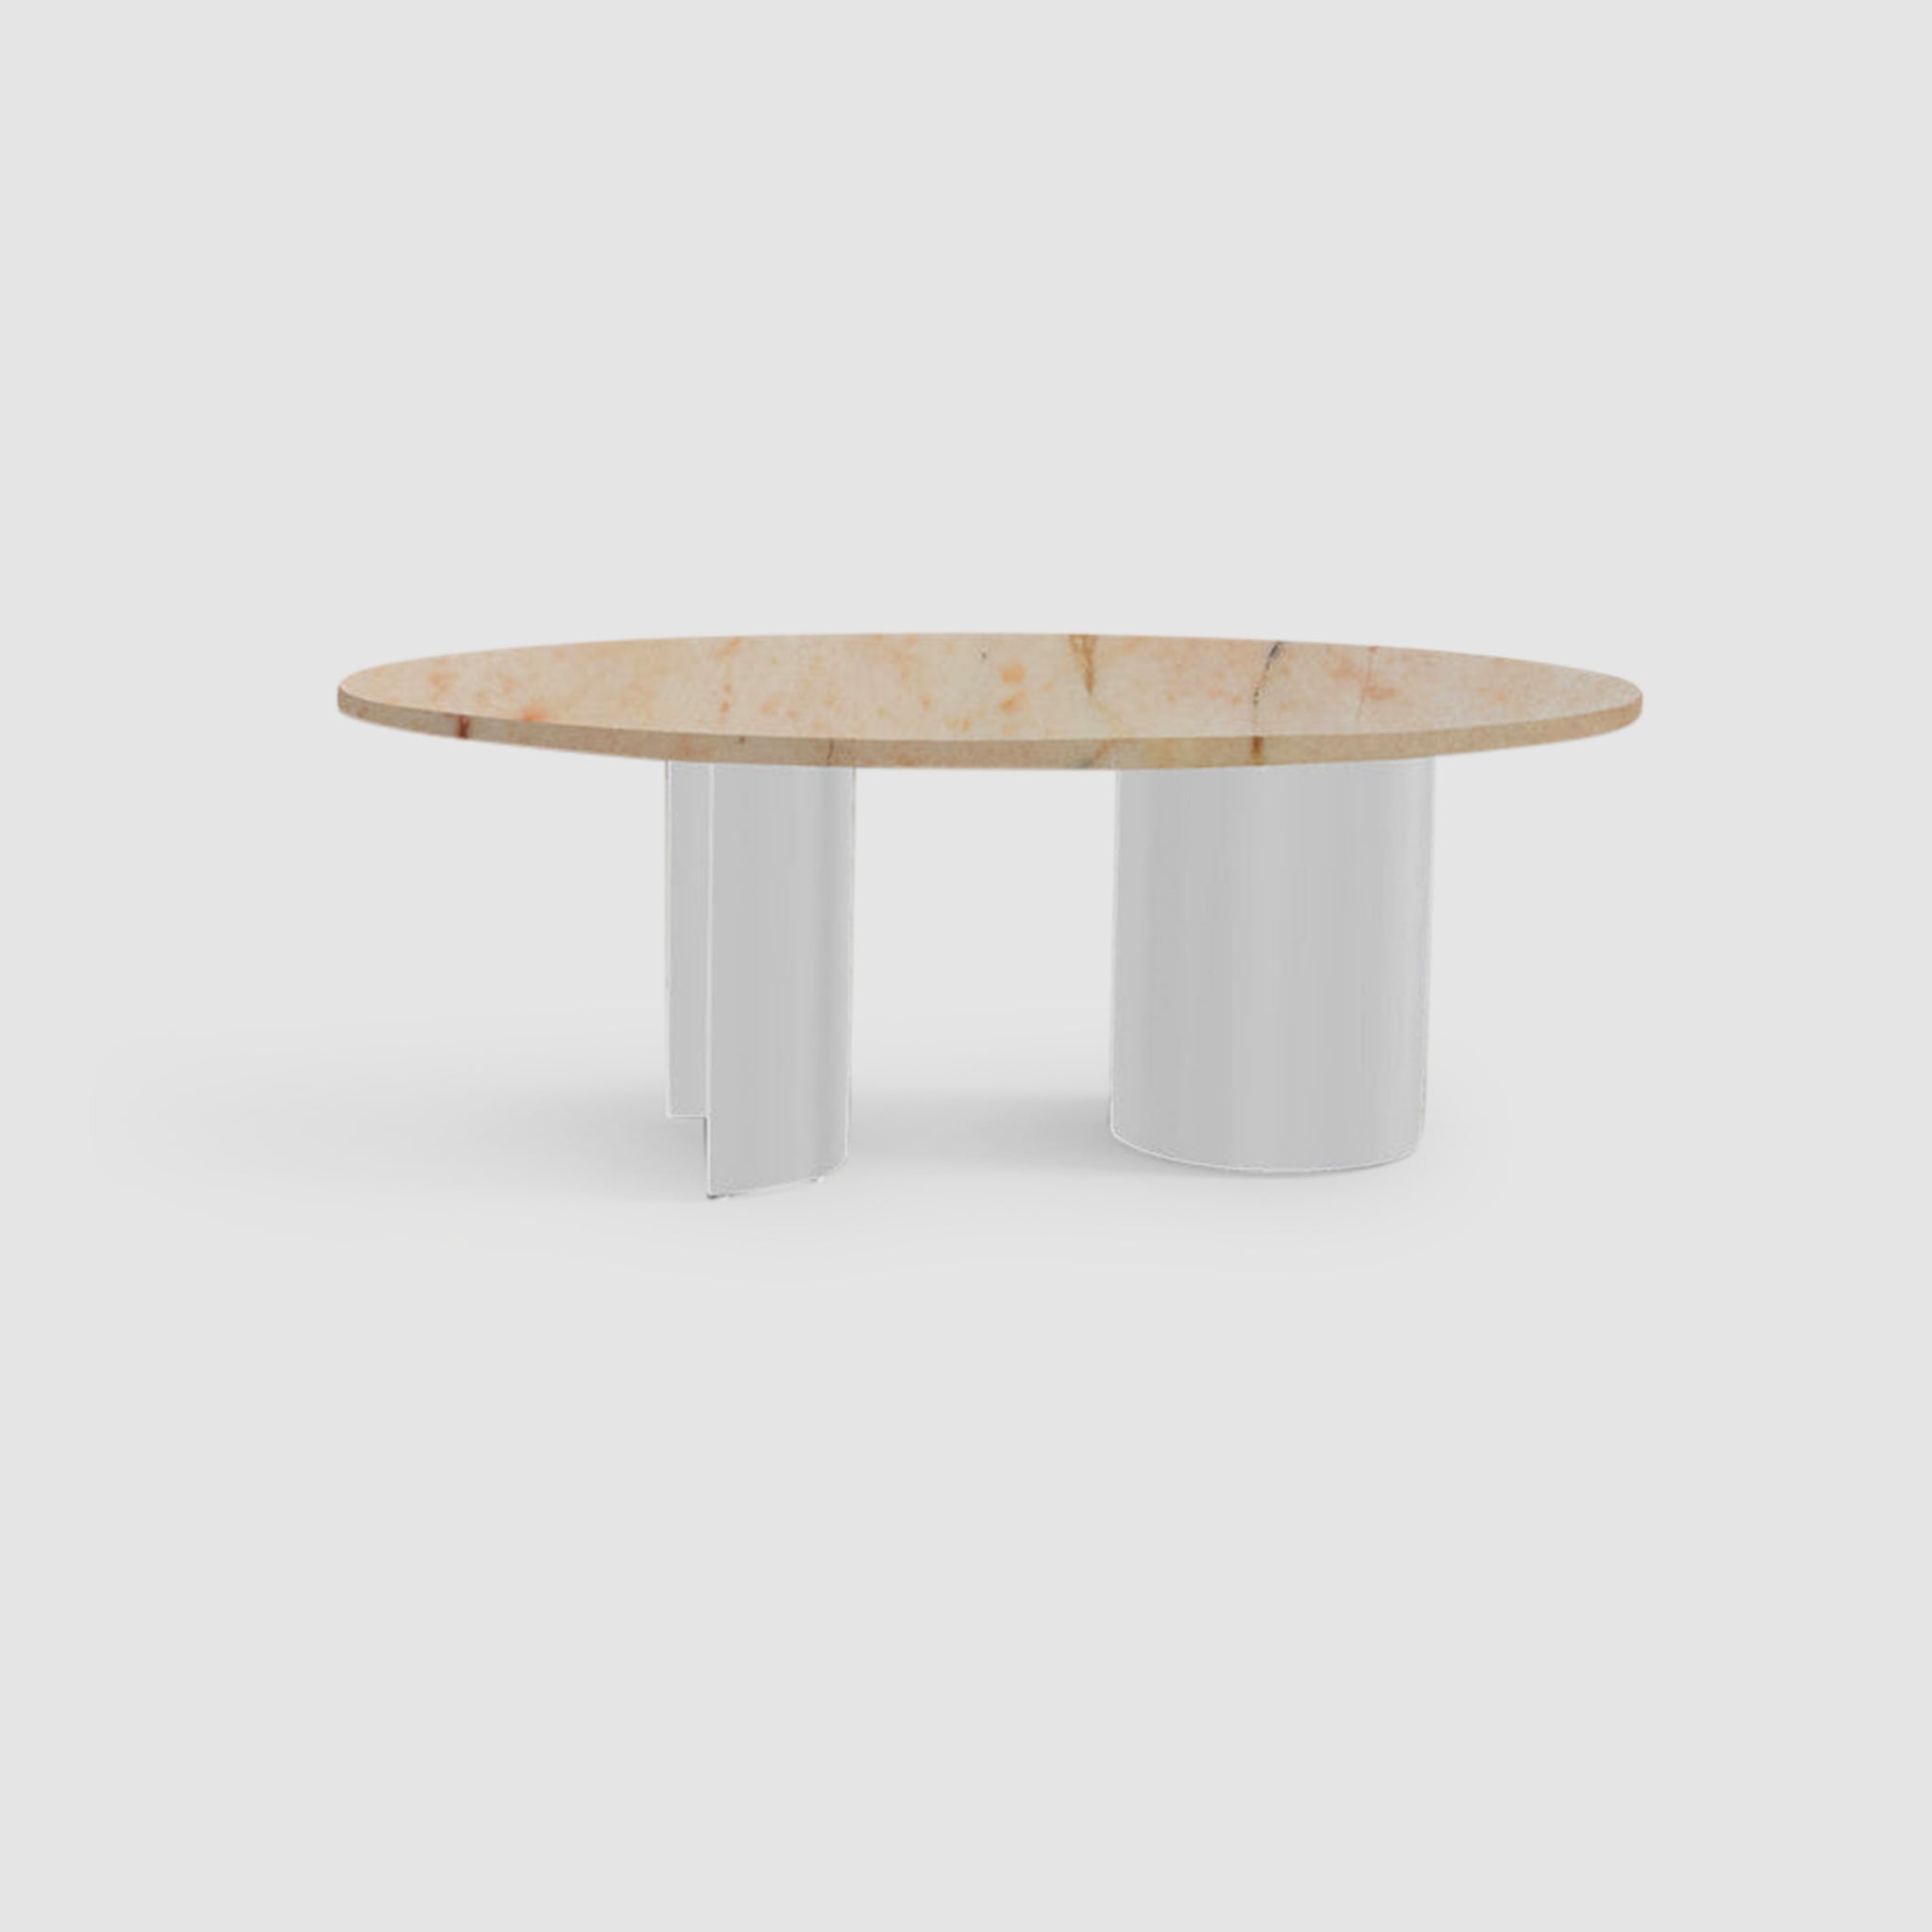 Round Marble Coffee Table: Luxurious and versatile centerpiece for your living room.